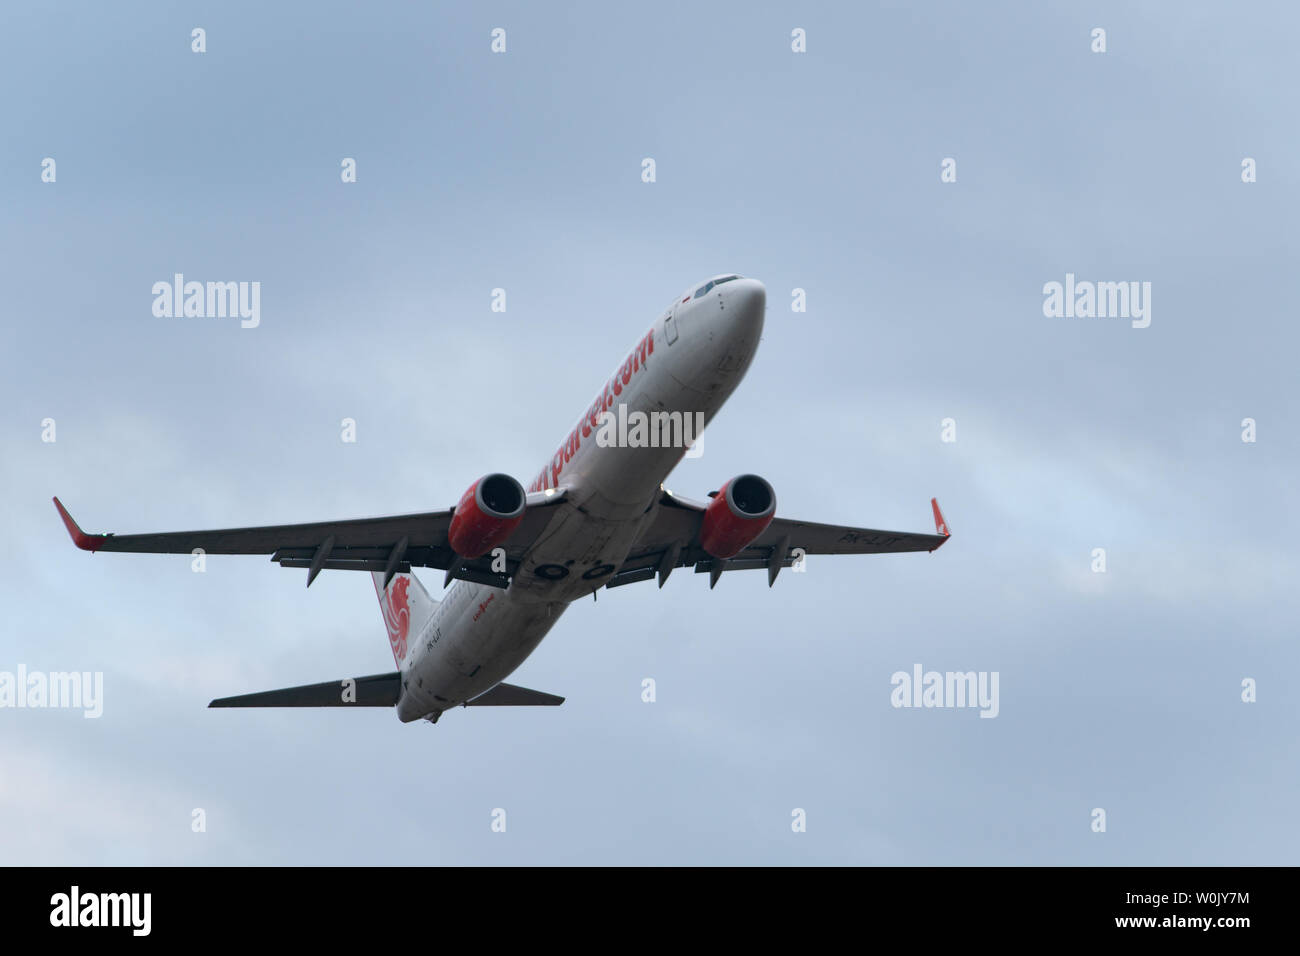 DENPASAR,BALI/INDONESIA-JUNE 08 2019: Lion air aeroplane is flying from Ngurah Rai International Airport Bali, when the sky is cloudy grey Stock Photo